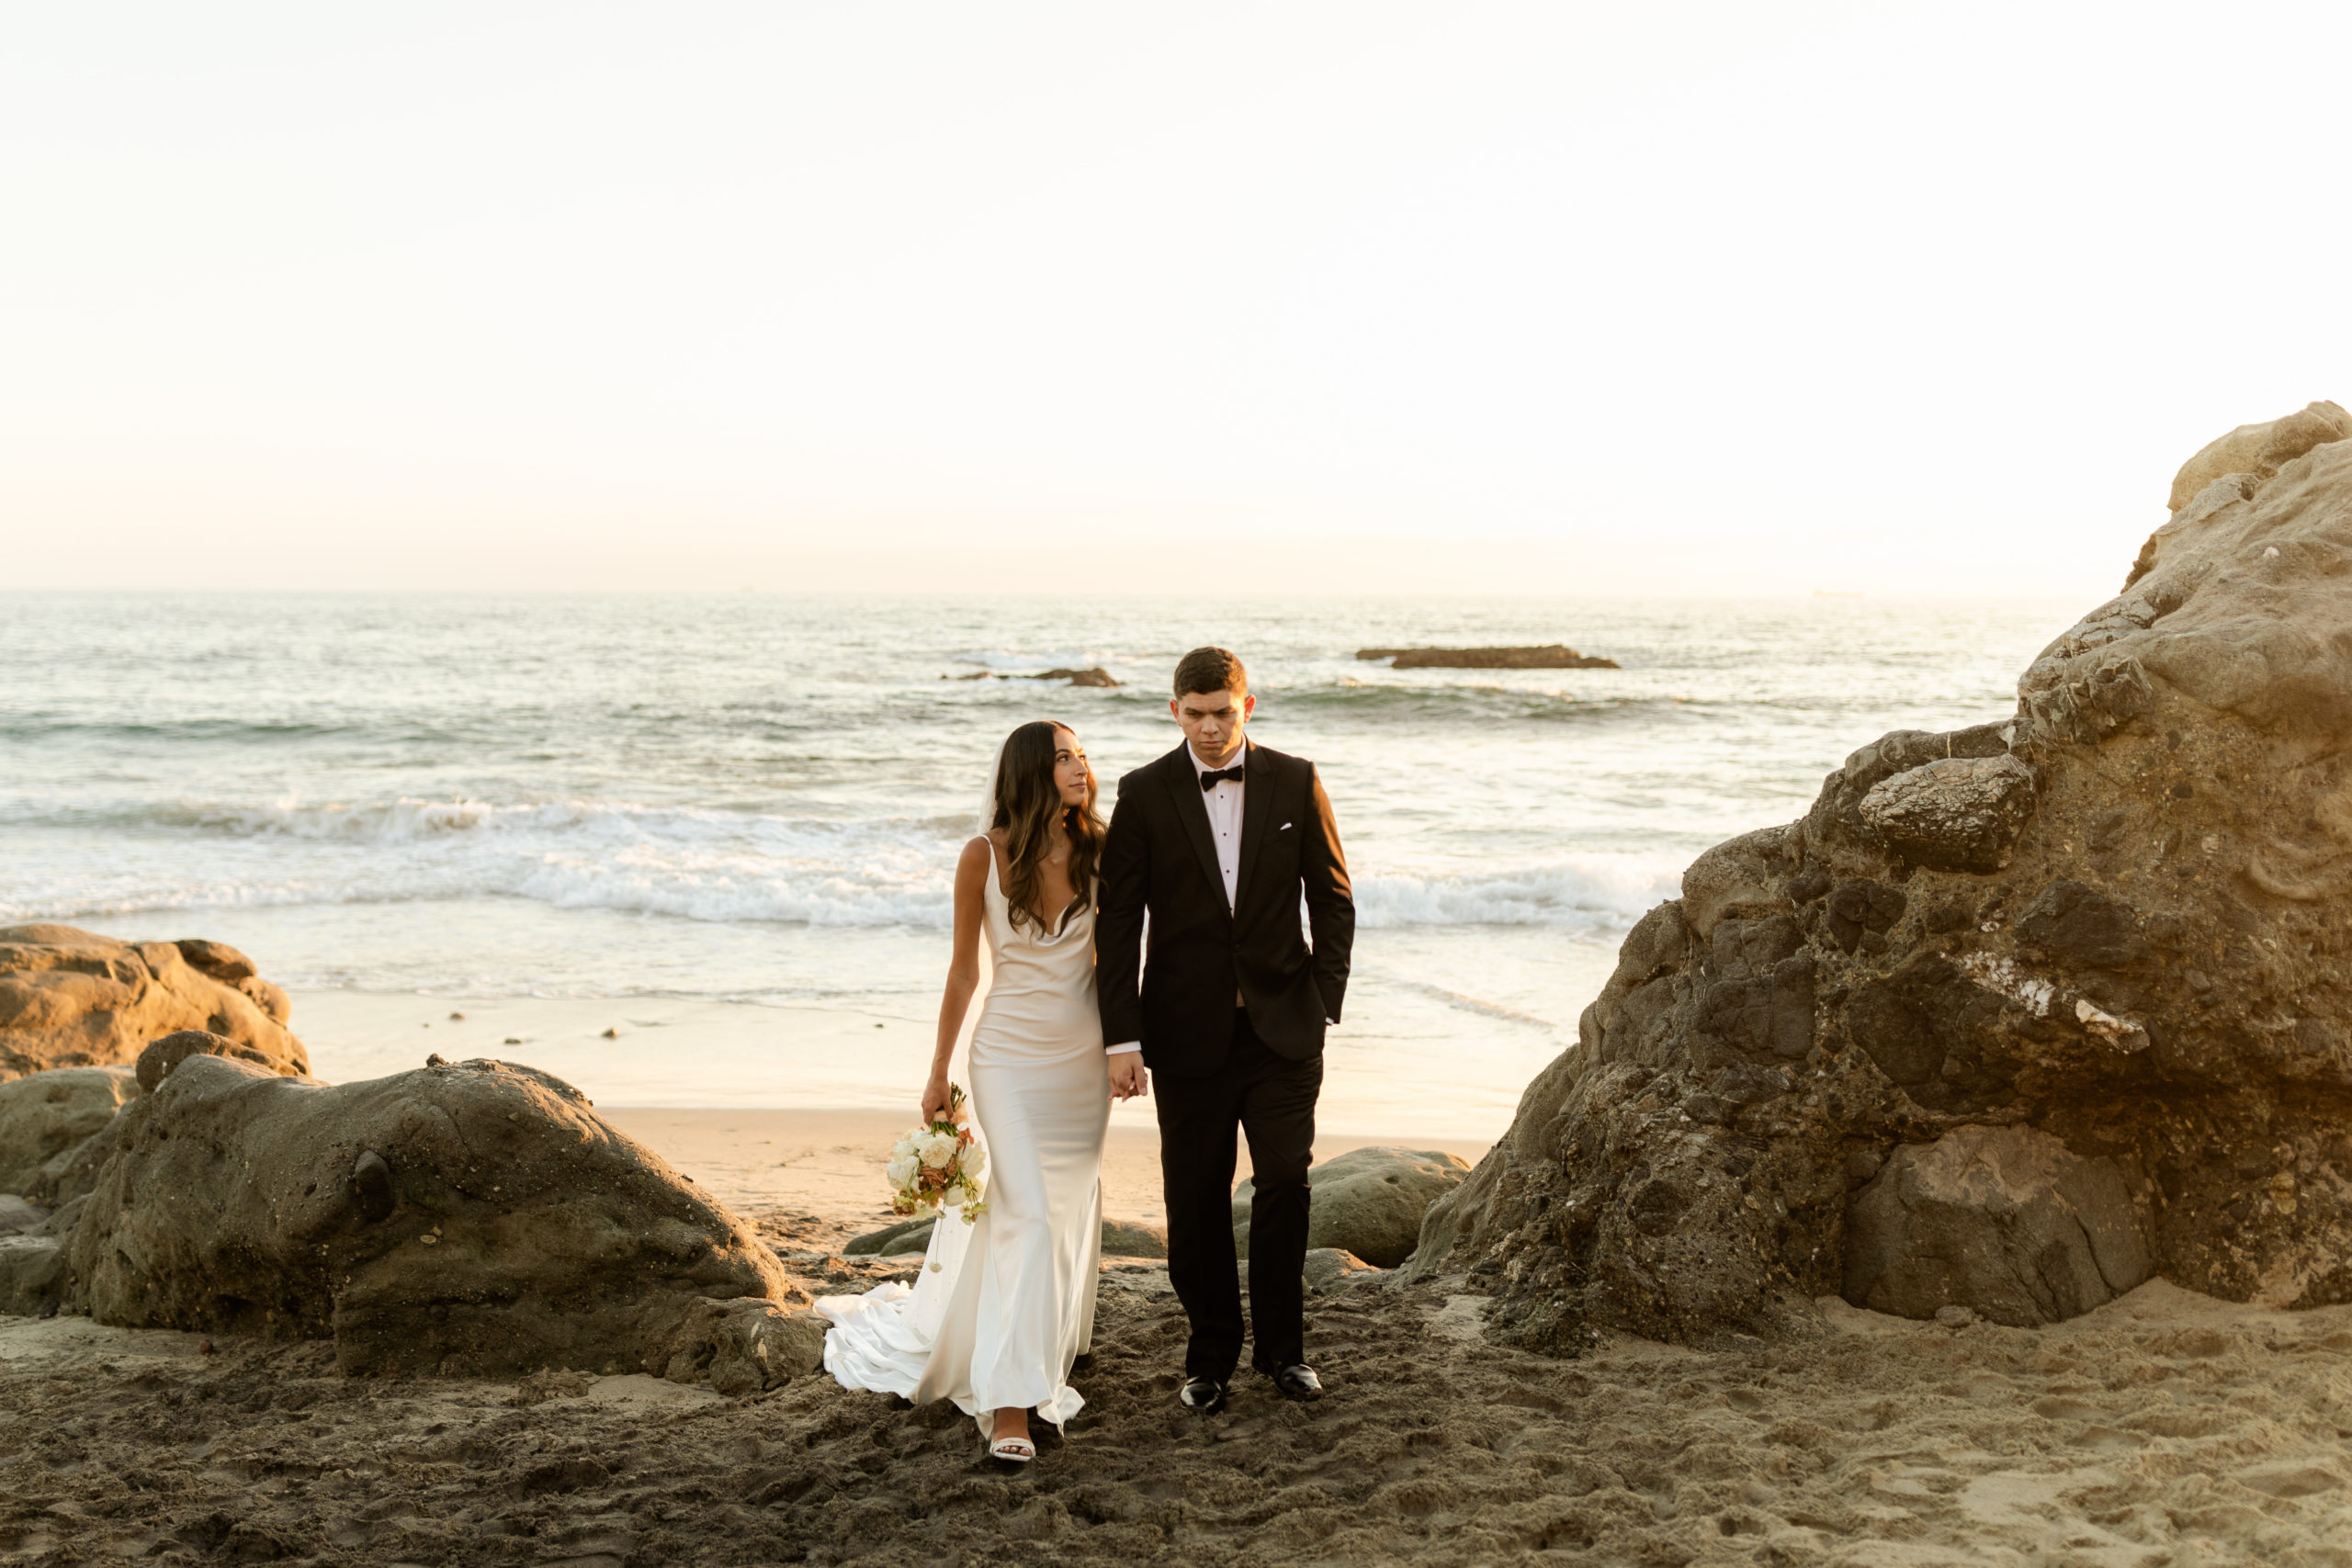 shot of the couple under cliffside on the beach